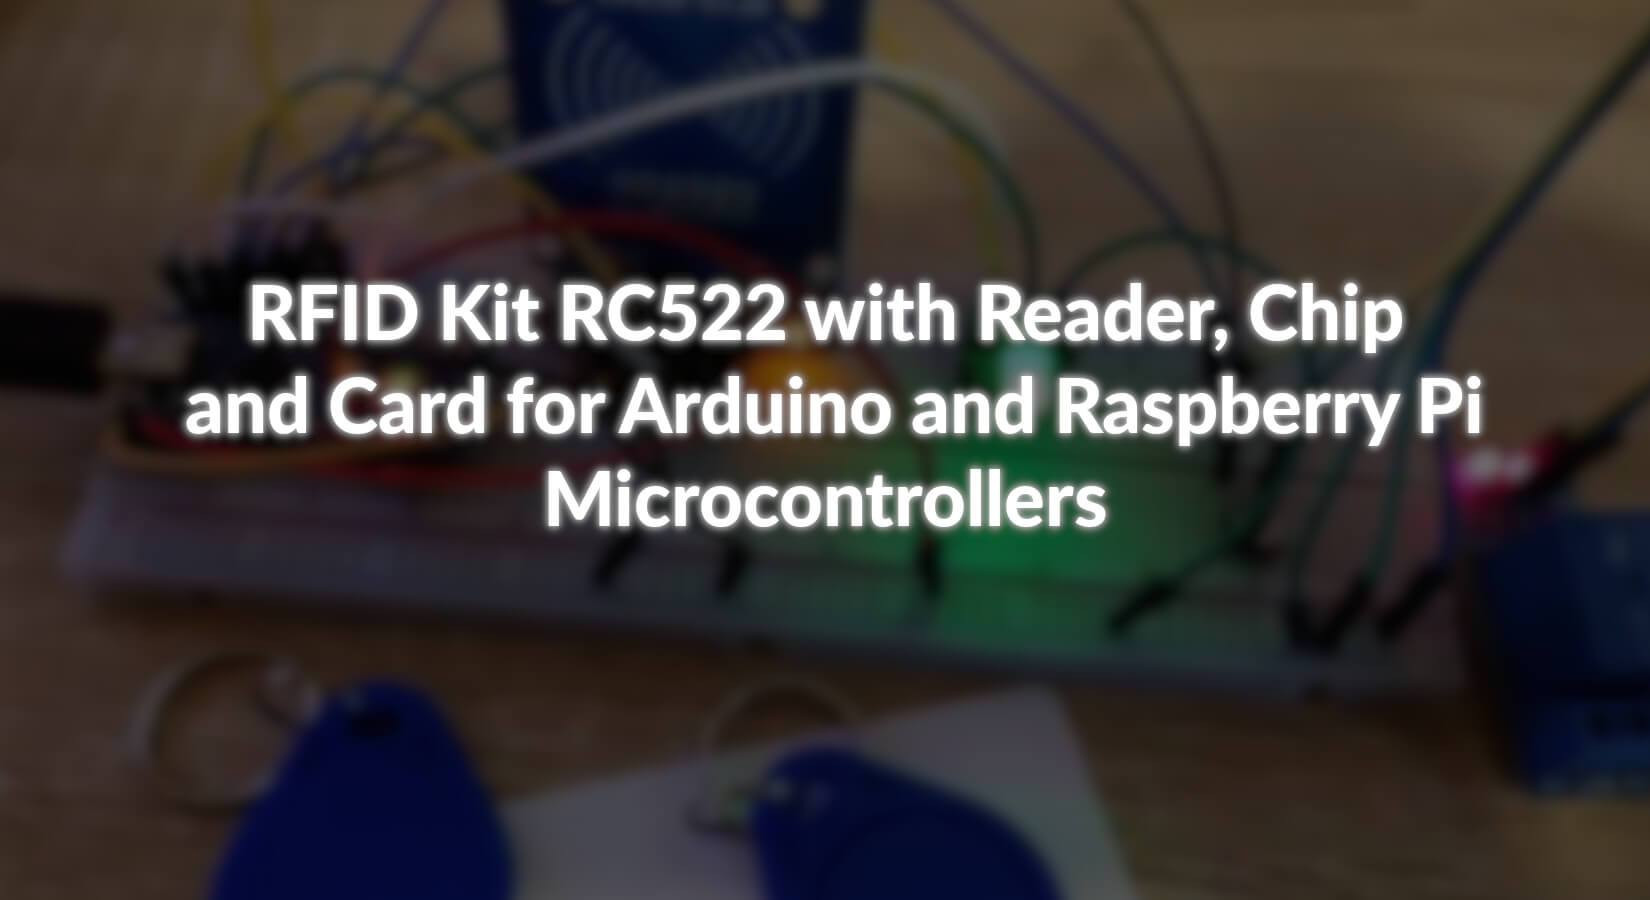 RFID Kit RC522 with Reader, Chip and Card for Arduino and Raspberry Pi Microcontrollers - AZ-Delivery